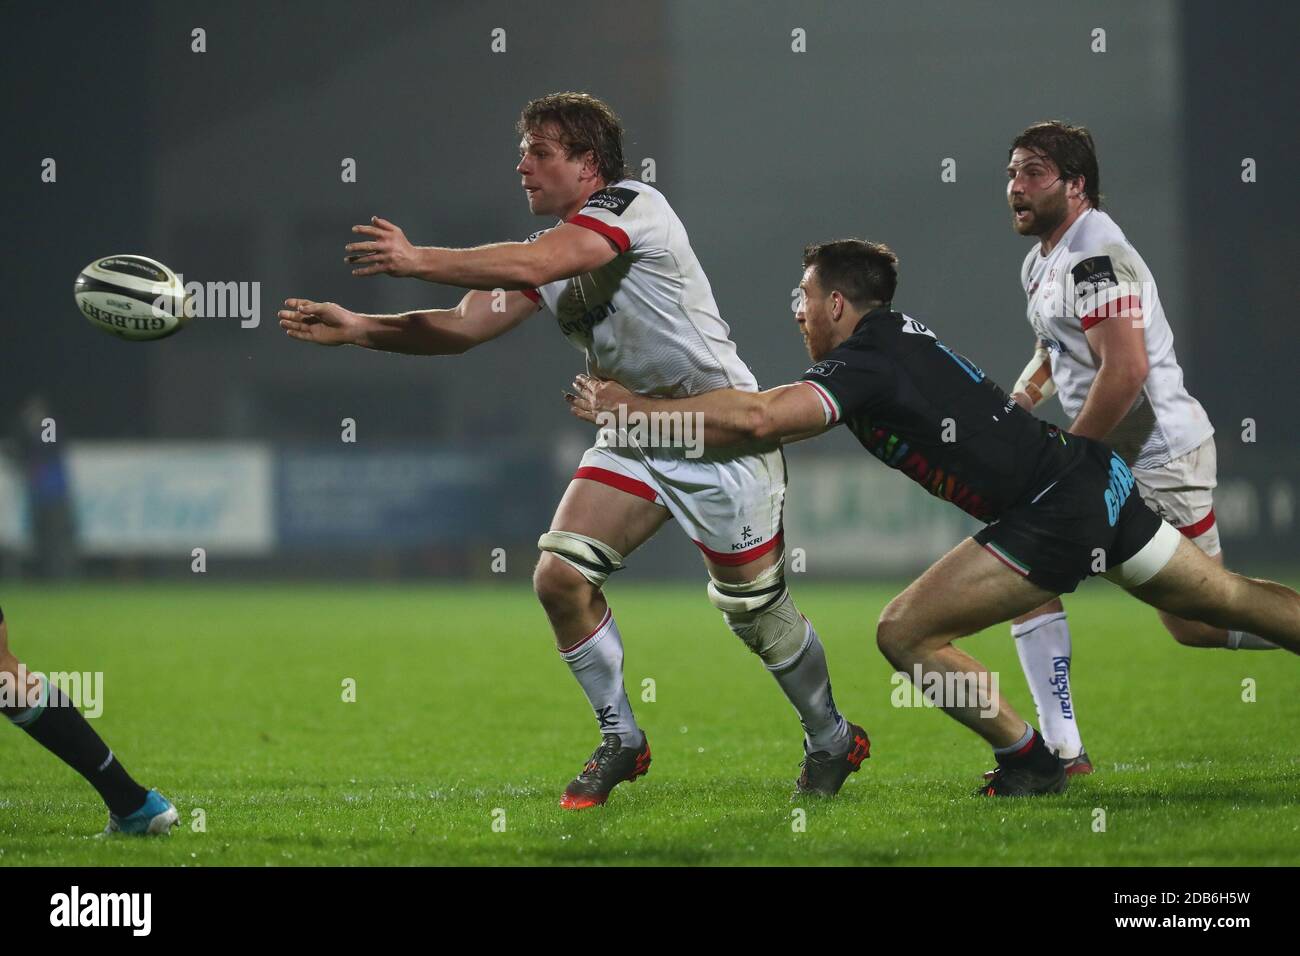 Sergio Lanfranchi stadium, Parma, Italy, 16 Nov 2020, Jordi Murphy (Ulster) passes the ball during Zebre Rugby vs Ulster Rugby, Rugby Guinness Pro 14 match - Photo Massimiliano Carnabuci / LM Stock Photo